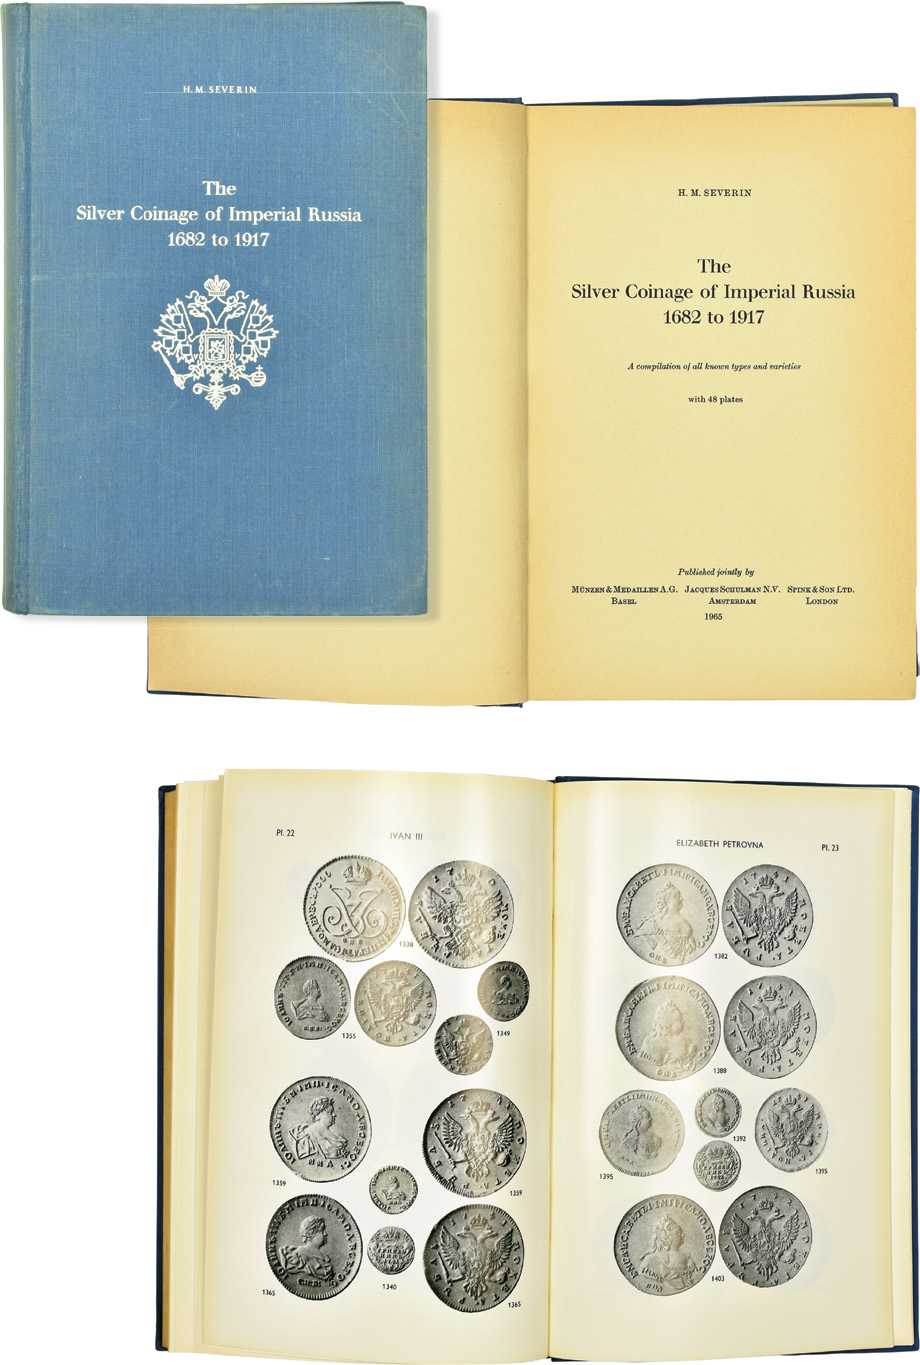 Лот №644, H.M. Severin Базель, 1965 года. The Silver Coinage of Imperial Russia 1682 to 1917. A compilation of all known types and varieties. (Серебряные монеты Императорской России с 1682 по 1917 годы)..